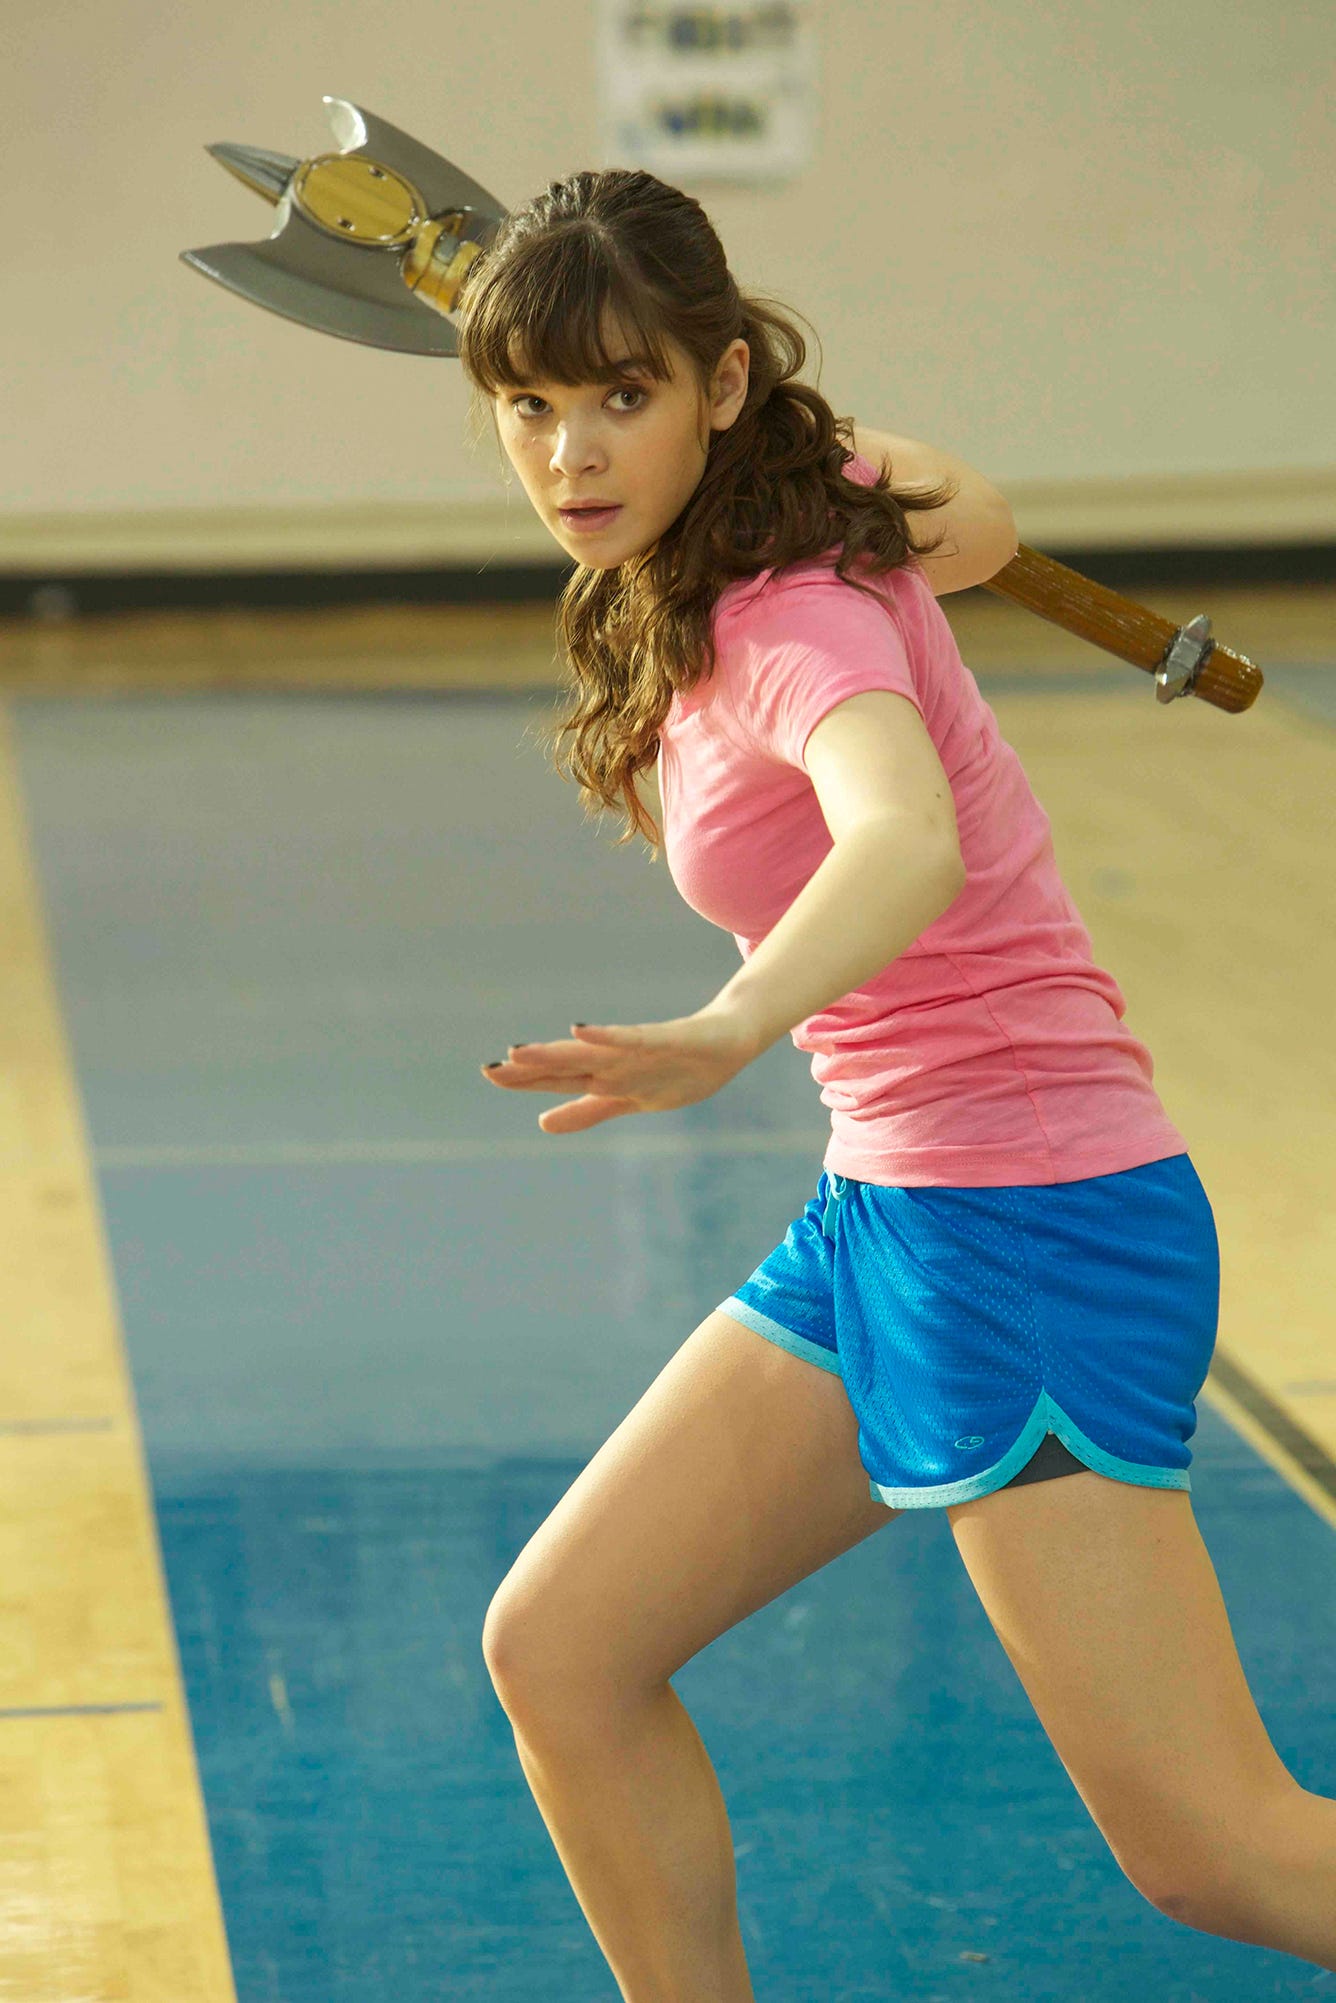 Review Barely Lethal Aims High But Misfires